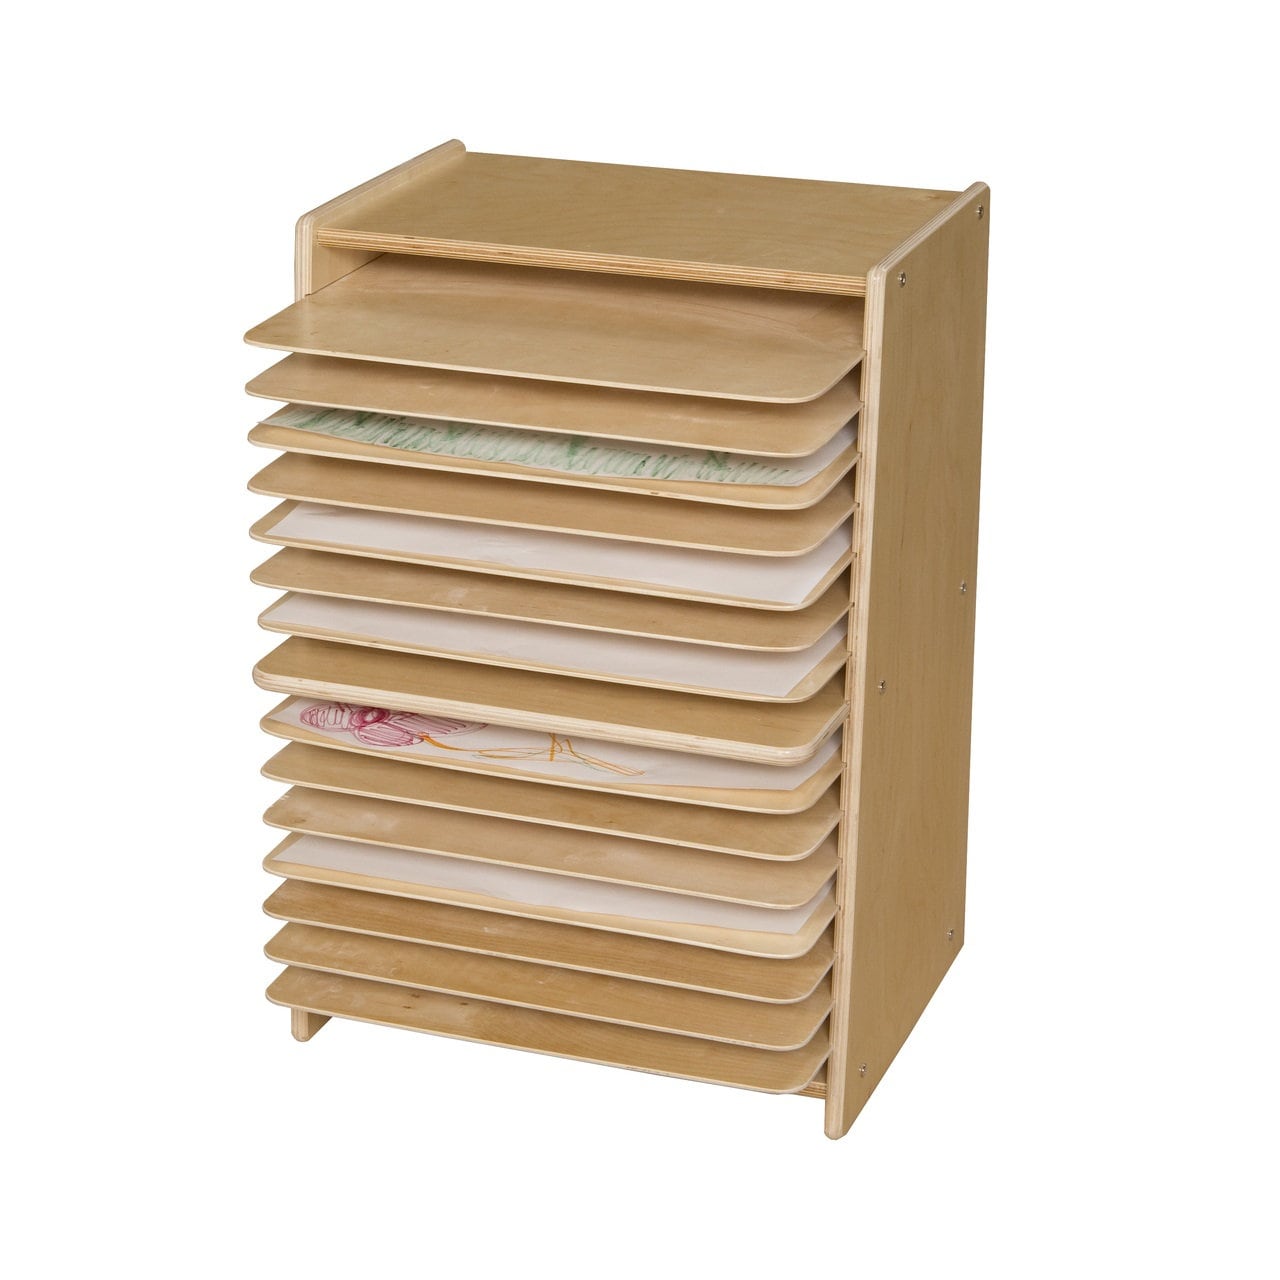 EX-LIBRIS® Drying Rack for Paper